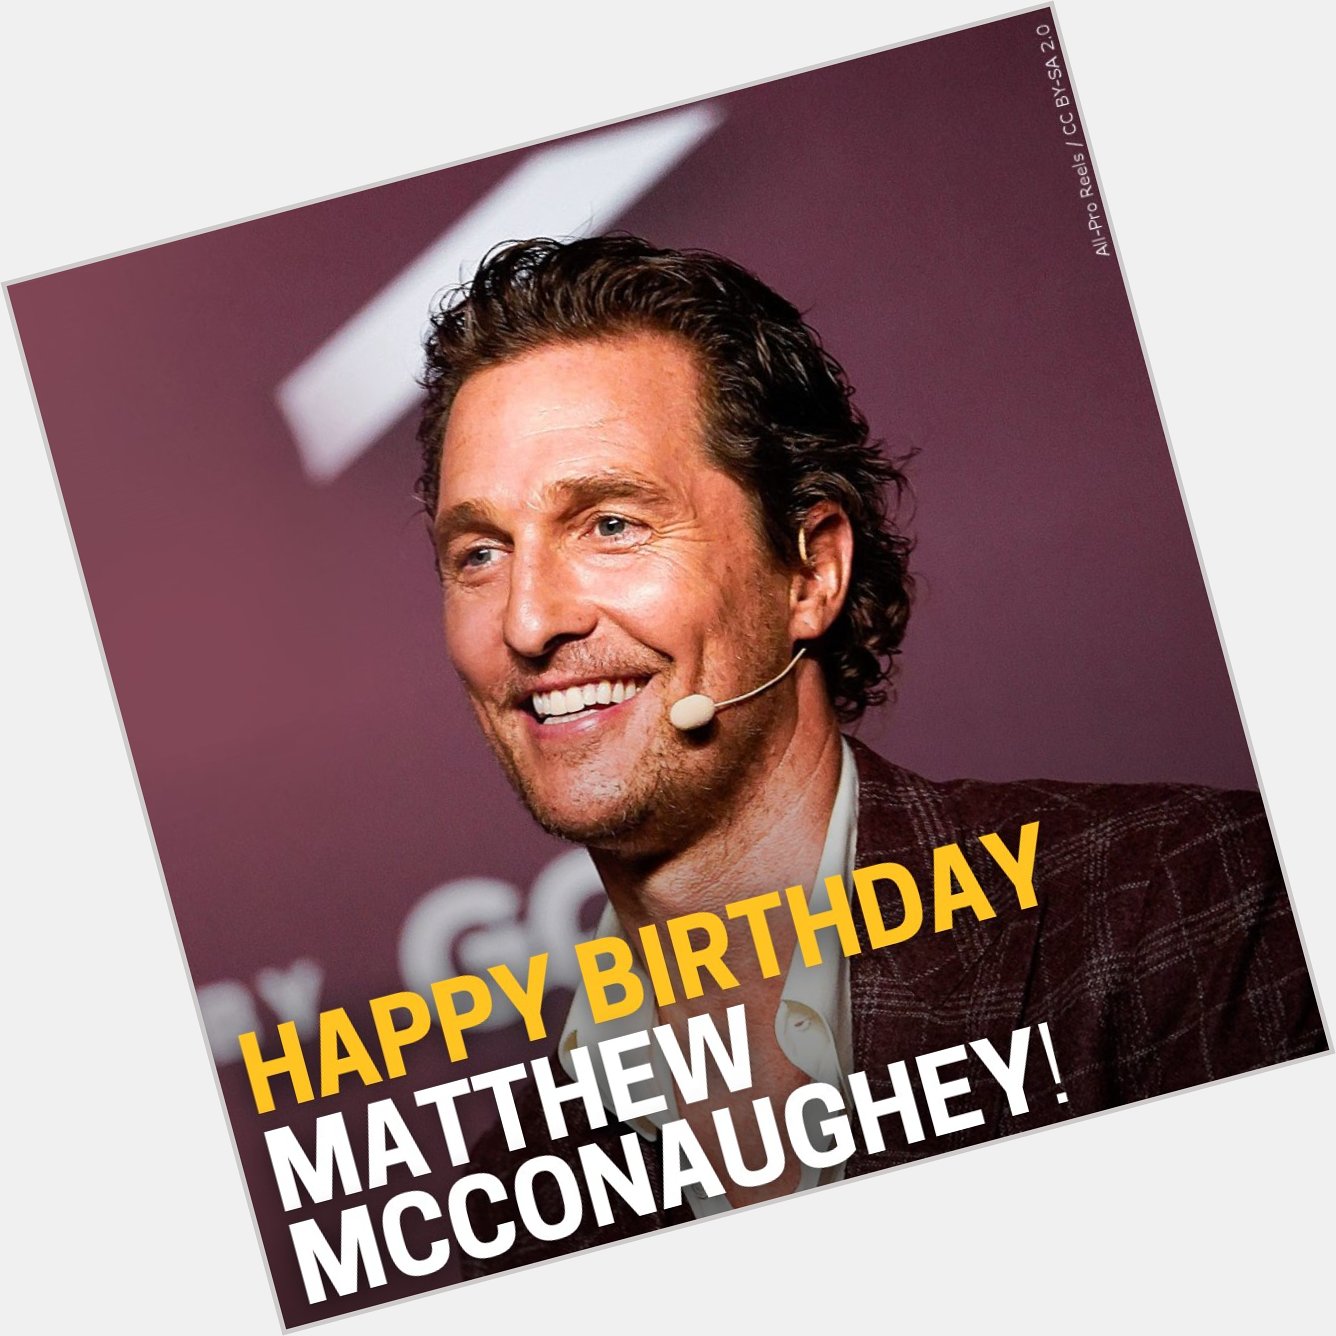 Alright, Alright, Alright! Happy Birthday, Matthew McConaughey! What is your favorite movie of the actor? 